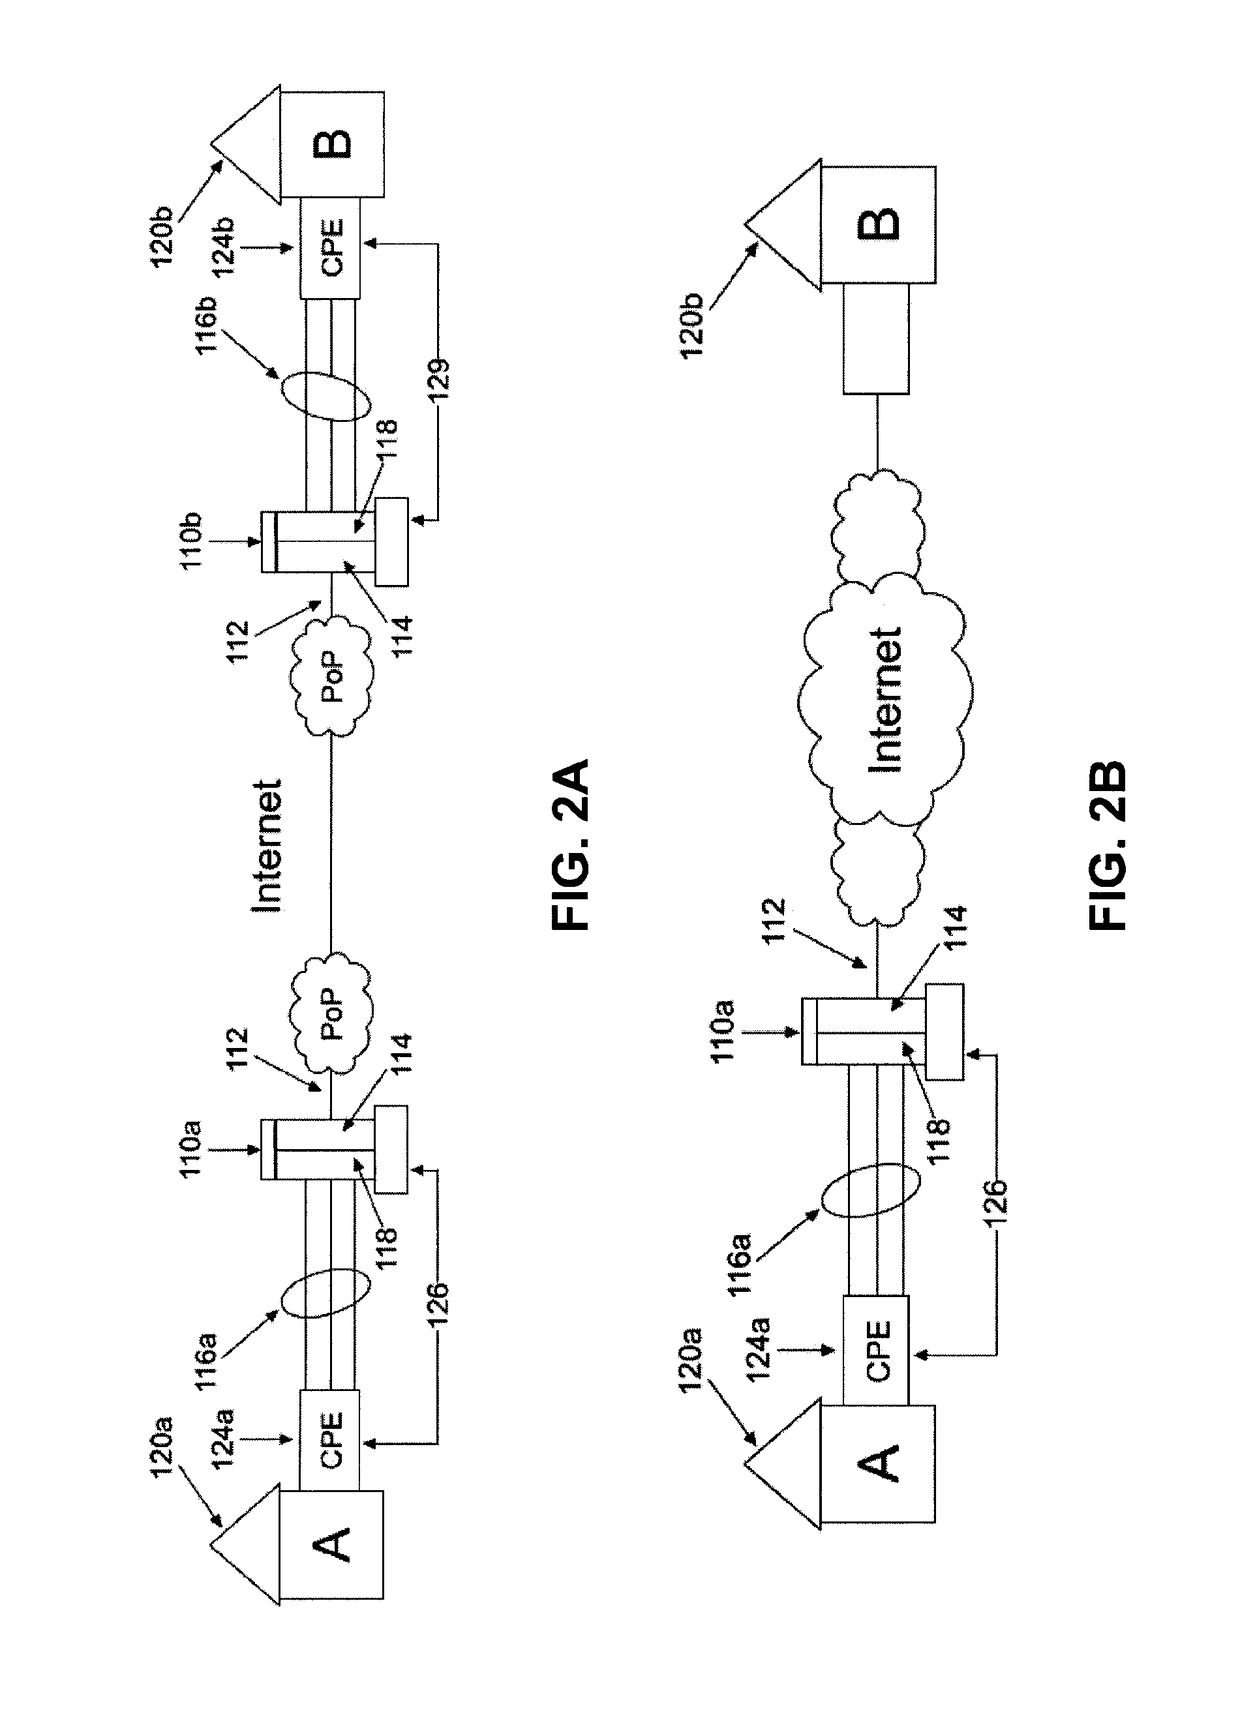 System, apparatus and method for providing improved performance of aggregated/bonded network connections with cloud provisioning